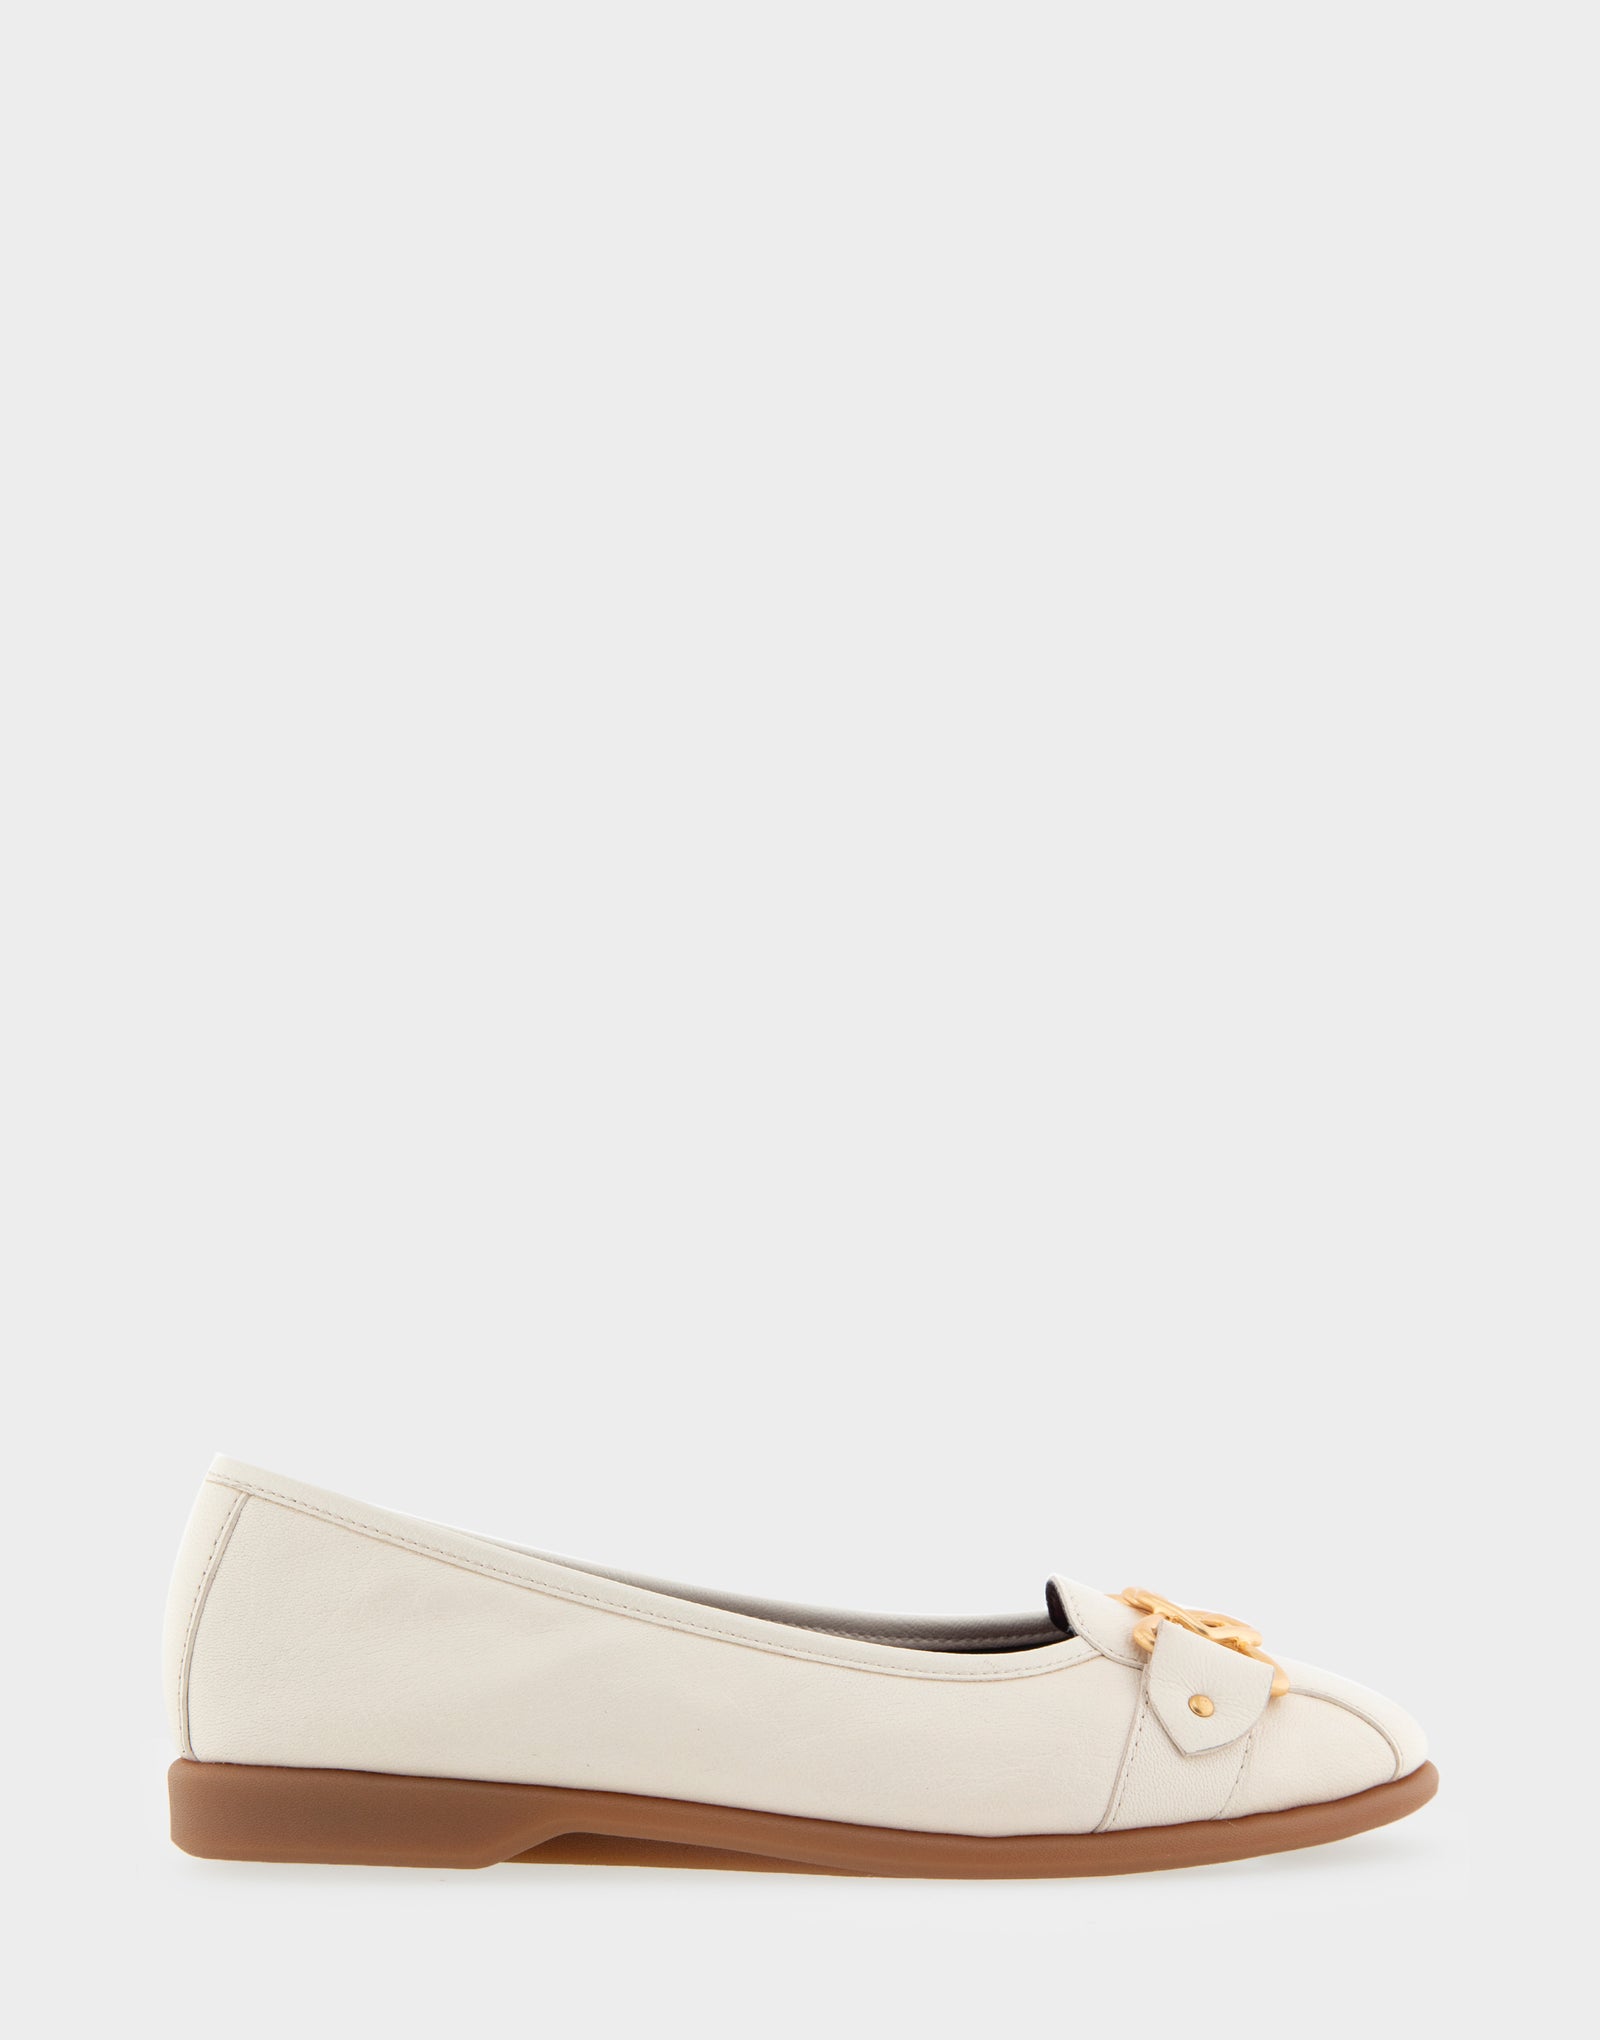 Women's Ornamented Flat in Off White